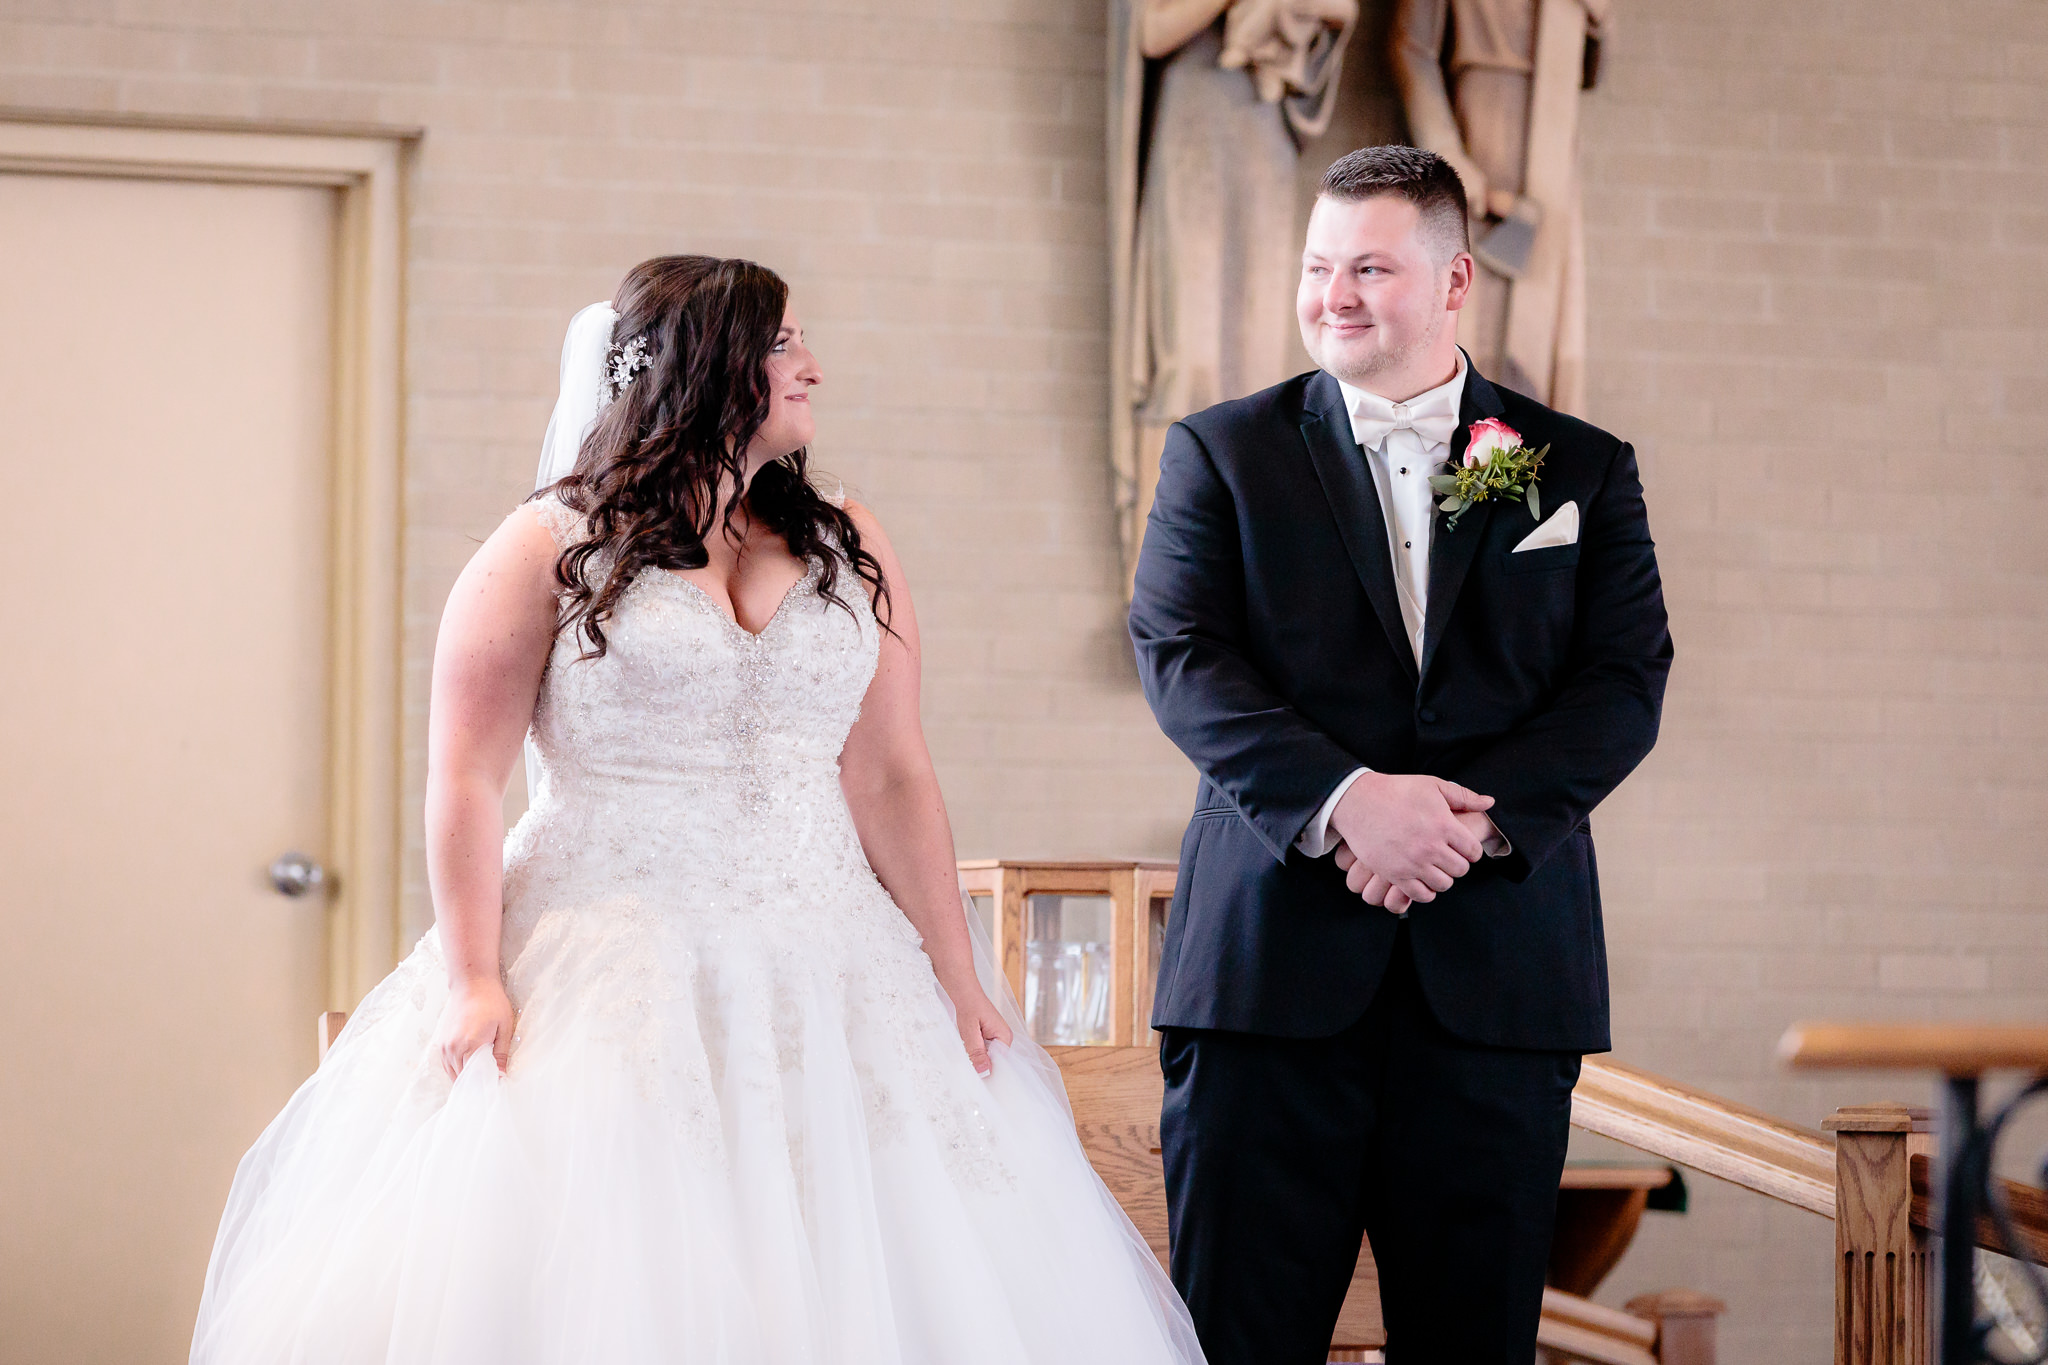 Bride and groom smile at each other during their wedding ceremony at St. Malachy